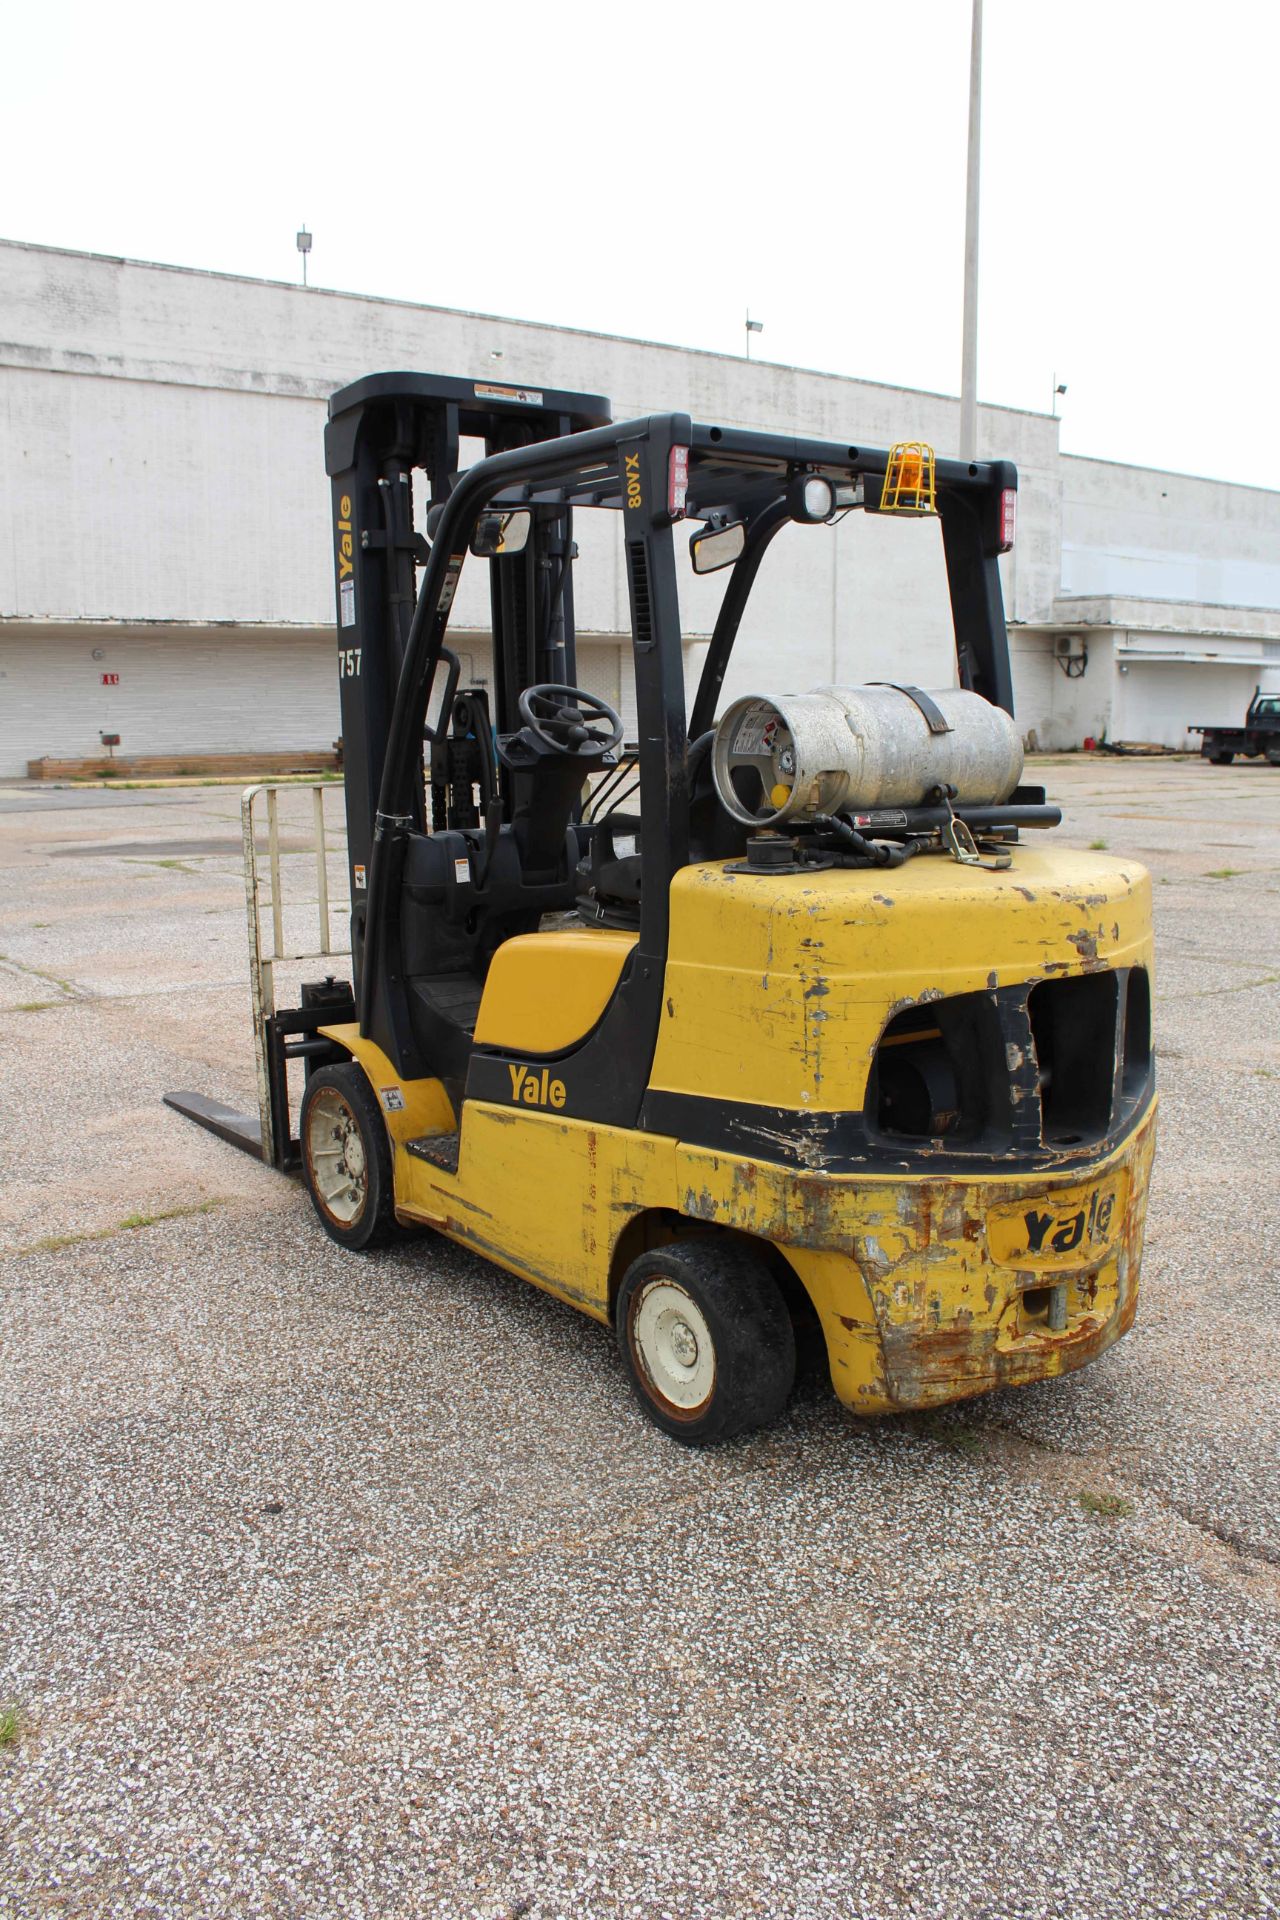 FORKLIFT, YALE 8,000 LB. CAP. MDL. GLC080VXNSE100, new 2011, LPG, 100" triple stage mast, 218" - Image 3 of 6